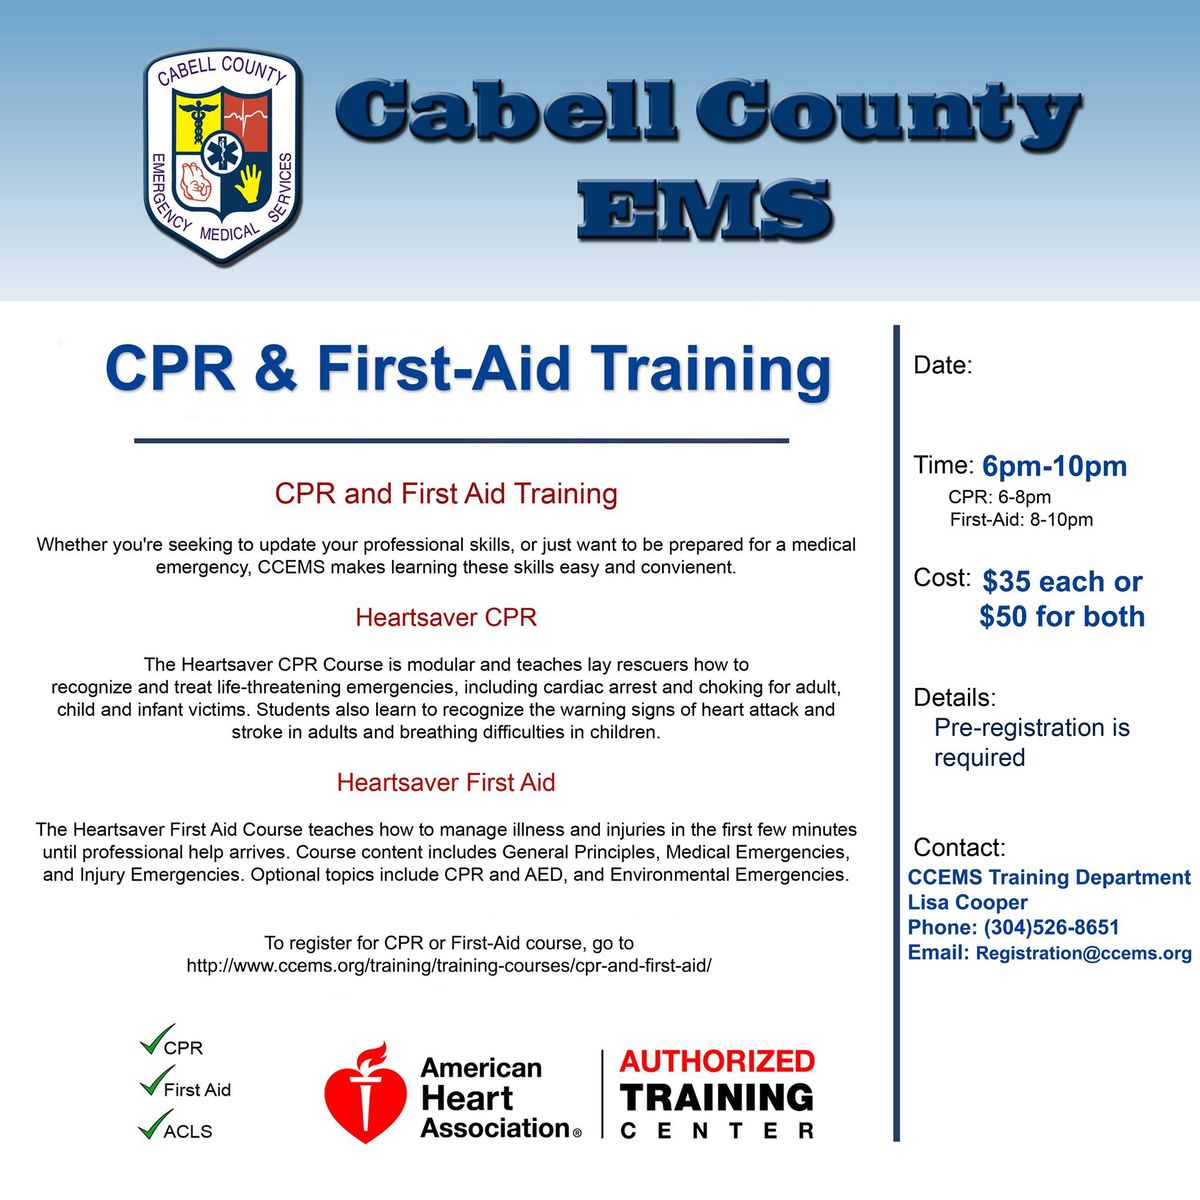 CPR and First-Aid Training